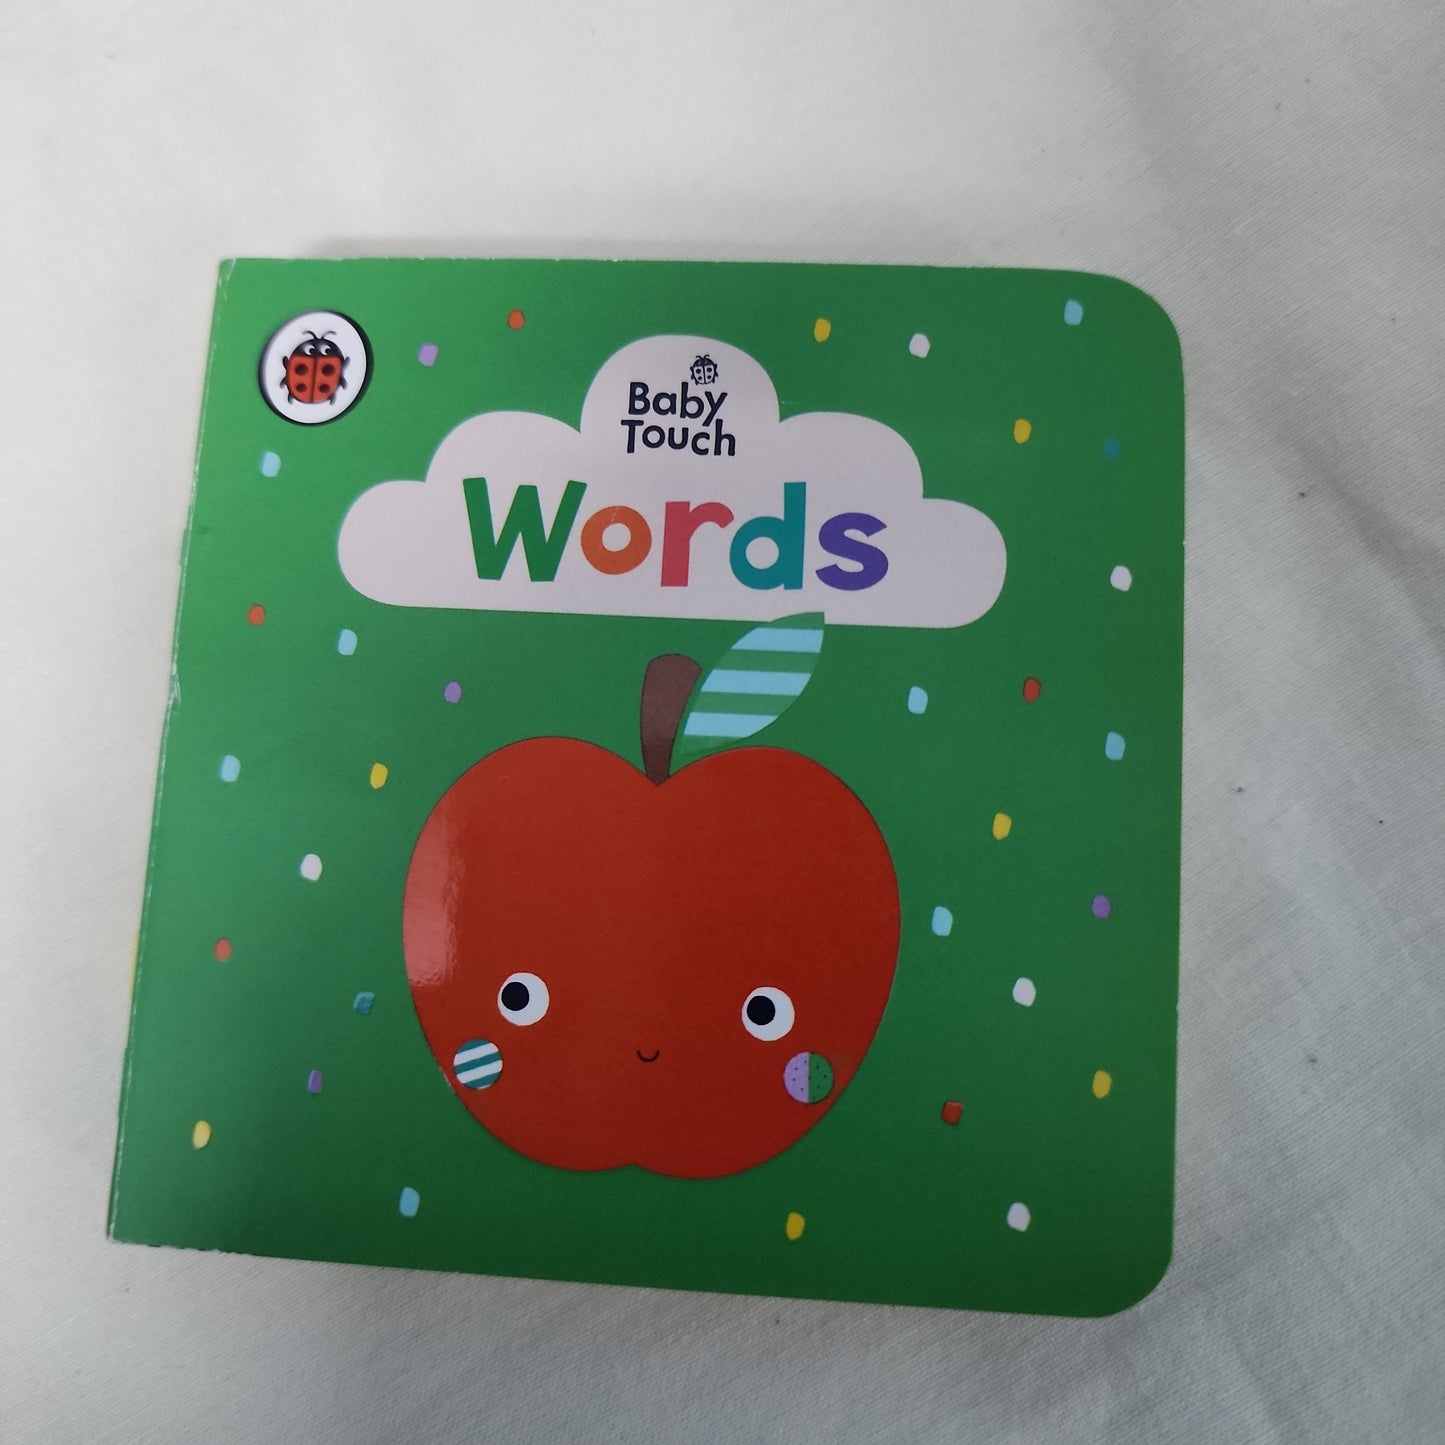 Words - Little Board book - As Good as New